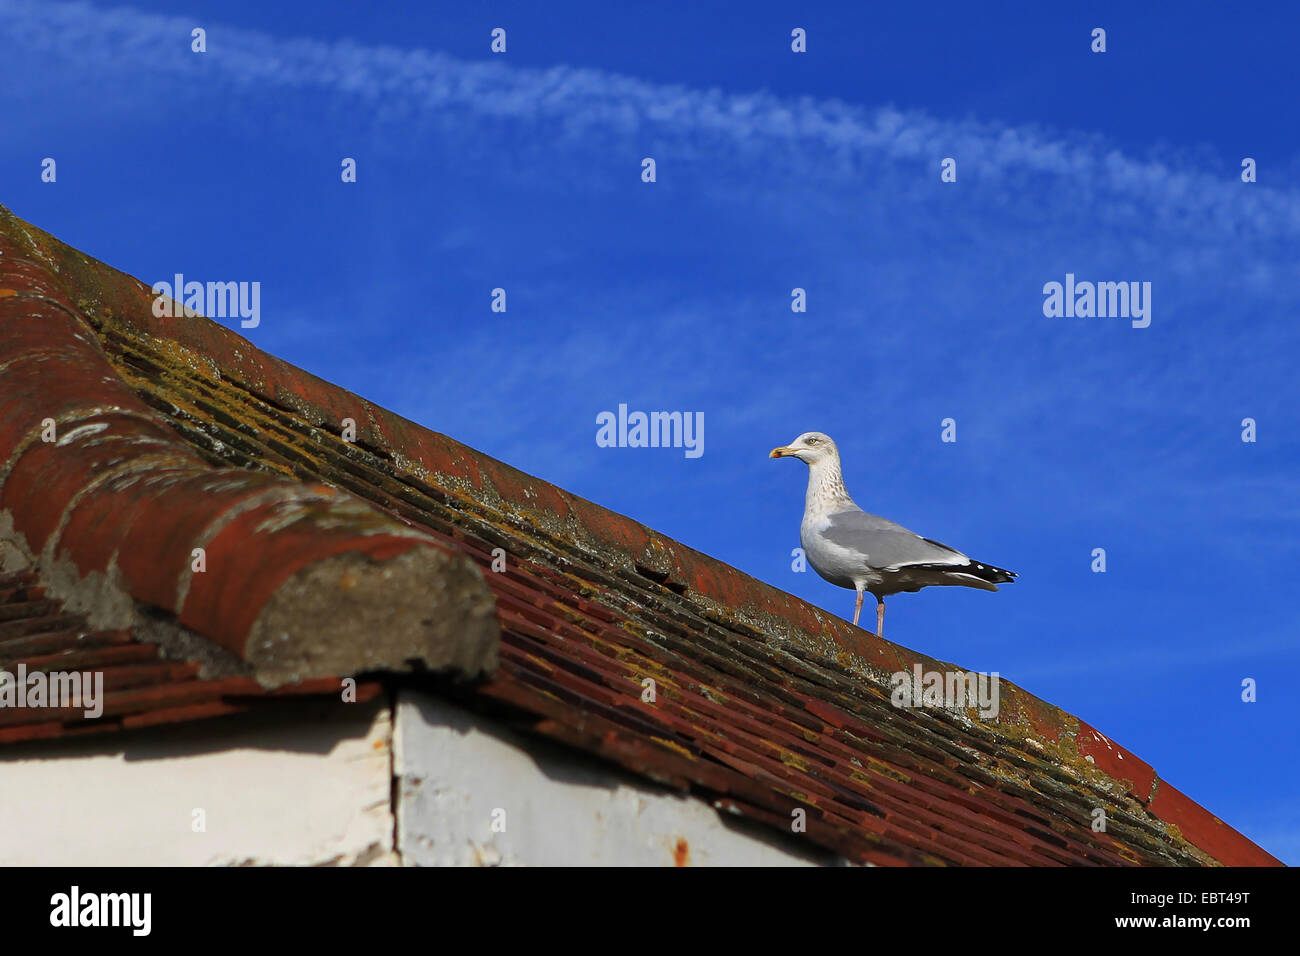 Wildlife - coast - East Kent - Minnis Bay, England - herring gull on a tiled roof with bright blue sky background Stock Photo